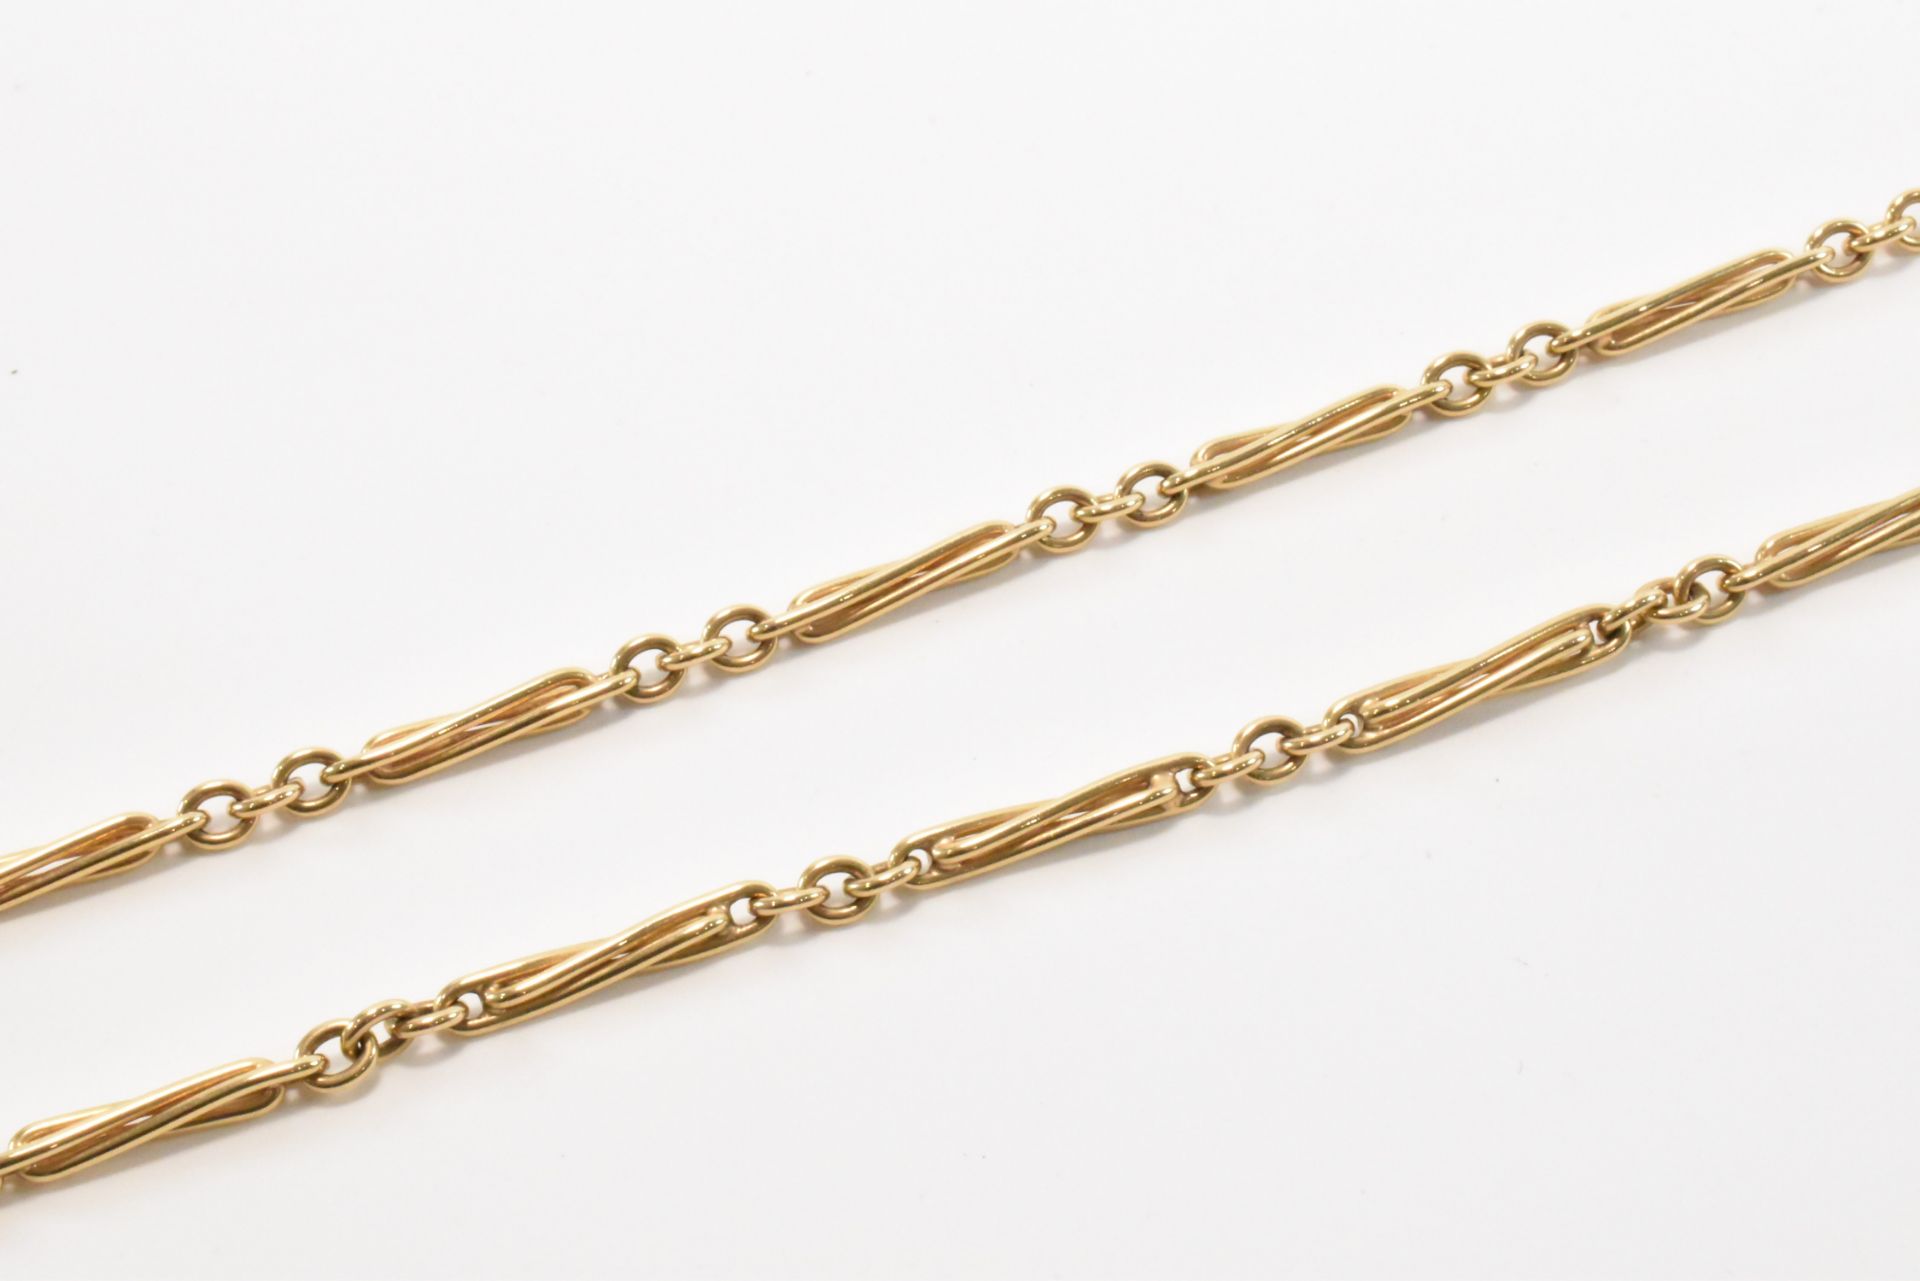 HALLMARKED 9CT GOLD FANCY LINK NECKLACE CHAIN - Image 4 of 4